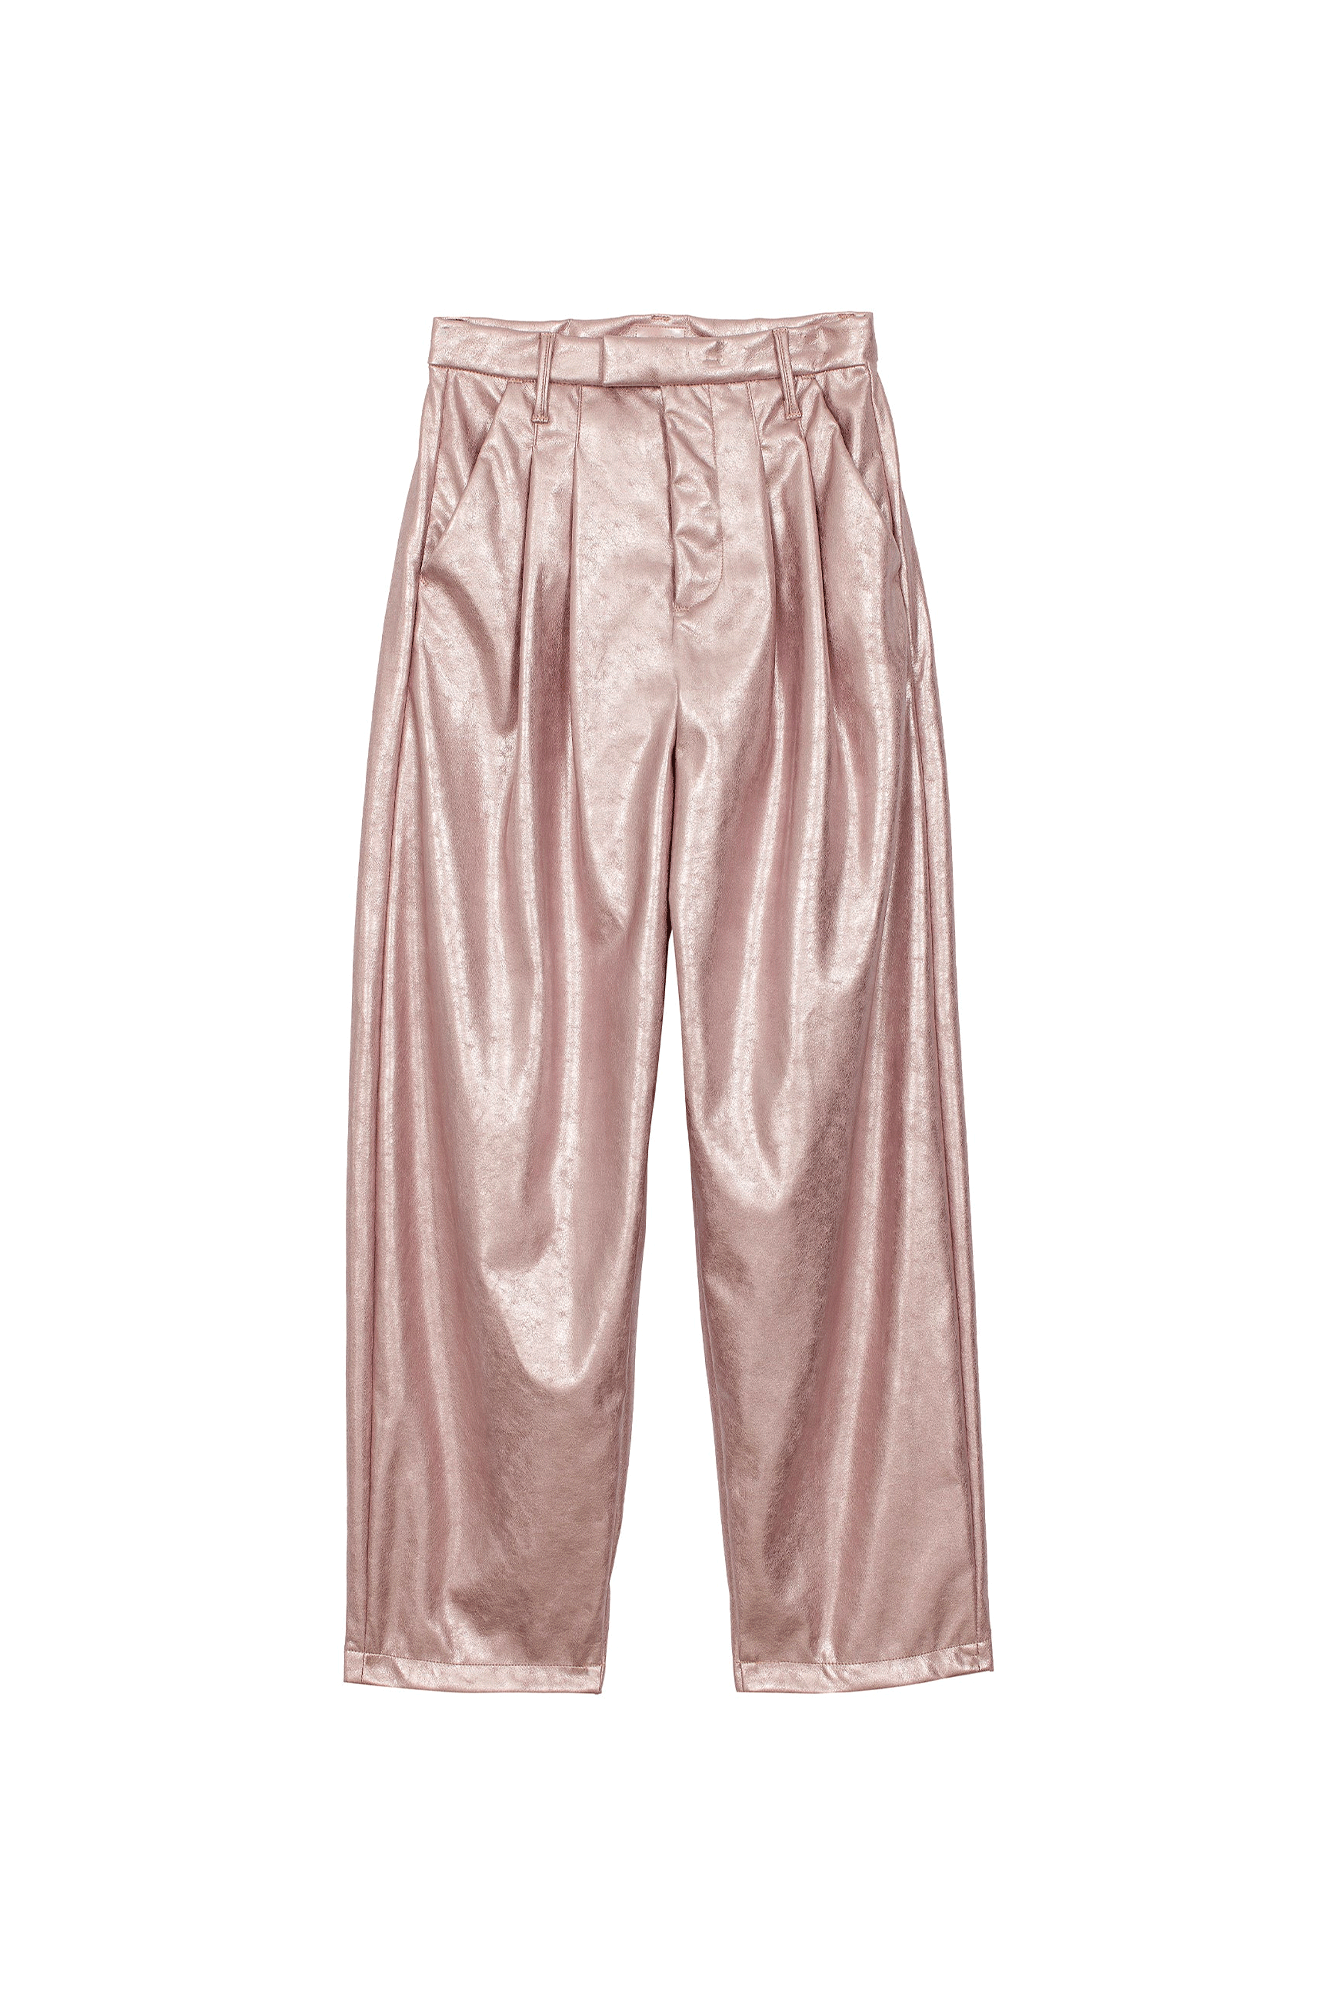 The Pleated Starlet Prep Skimp from Mother is made from faux leather fabric with a metallic light pink hue for stylish in-season dressing. Its wide leg, pleated waist and 31-inch inseam provide a beautiful silhouette with a clean hem. Perfect for adding a touch of elegance to any look.